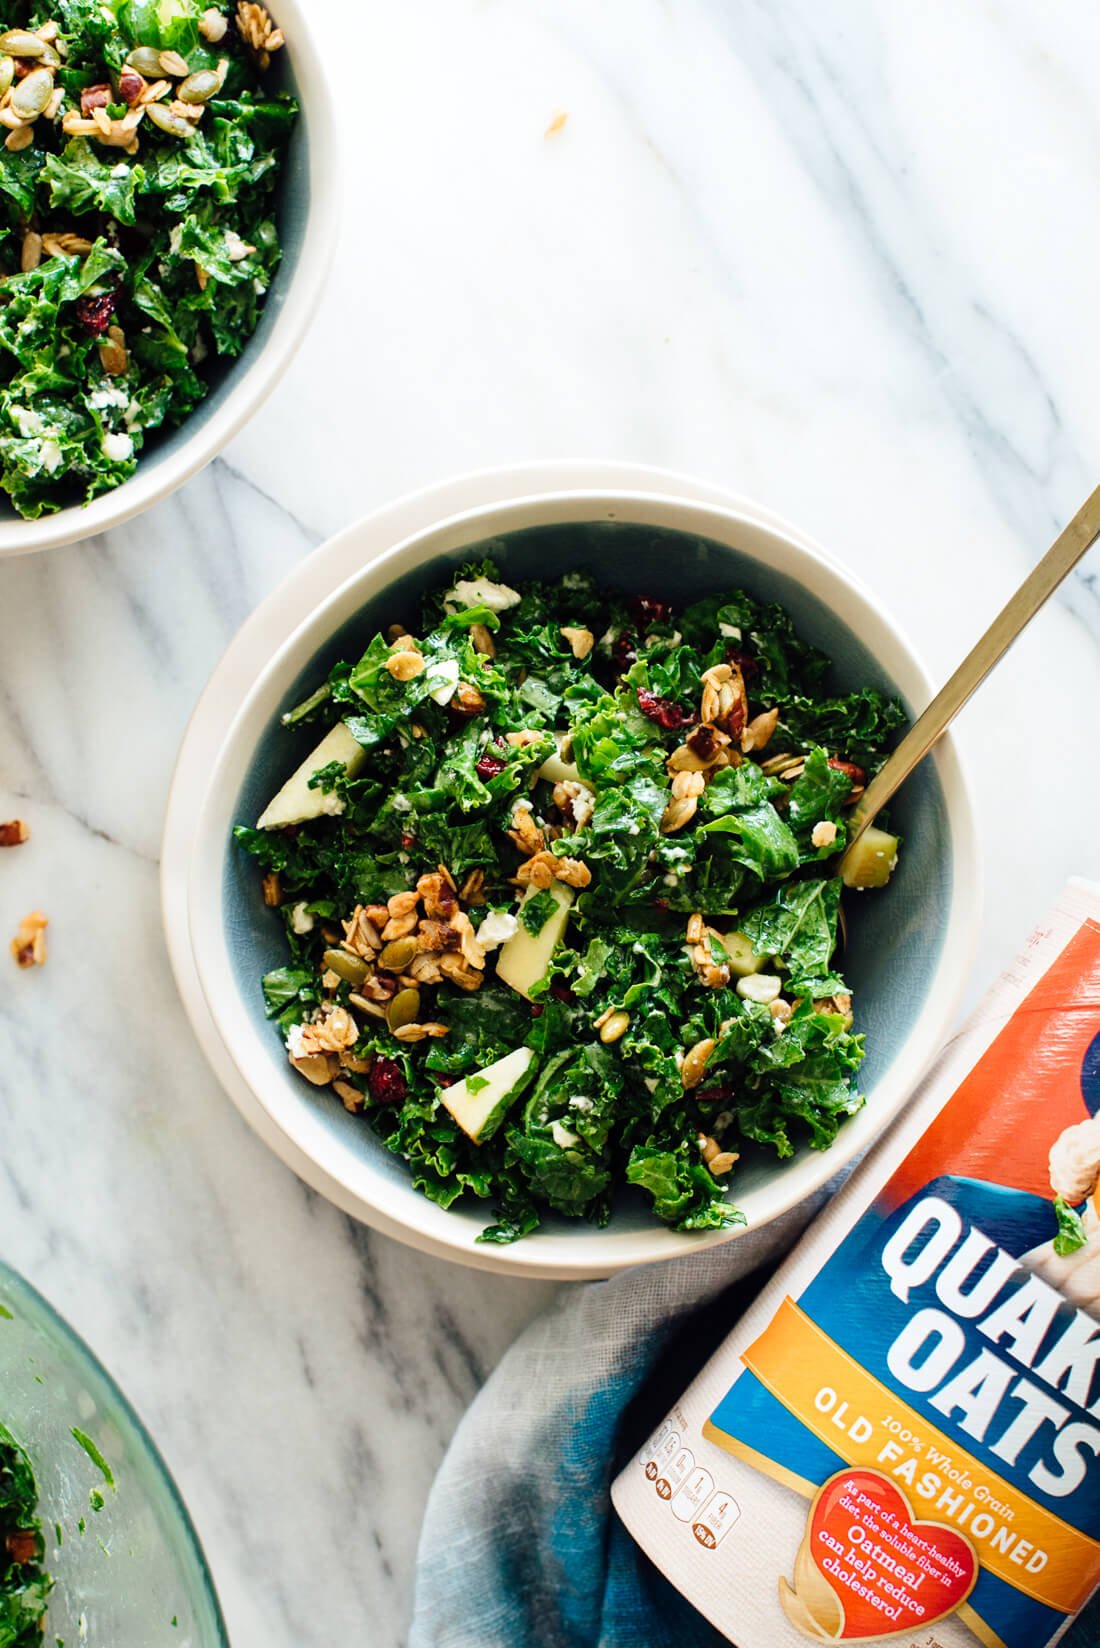 Nutty granola croutons complete this salad made with massaged raw kale, crisp chopped apple, and crumbled goat cheese tossed in a tangy lemon dressing.